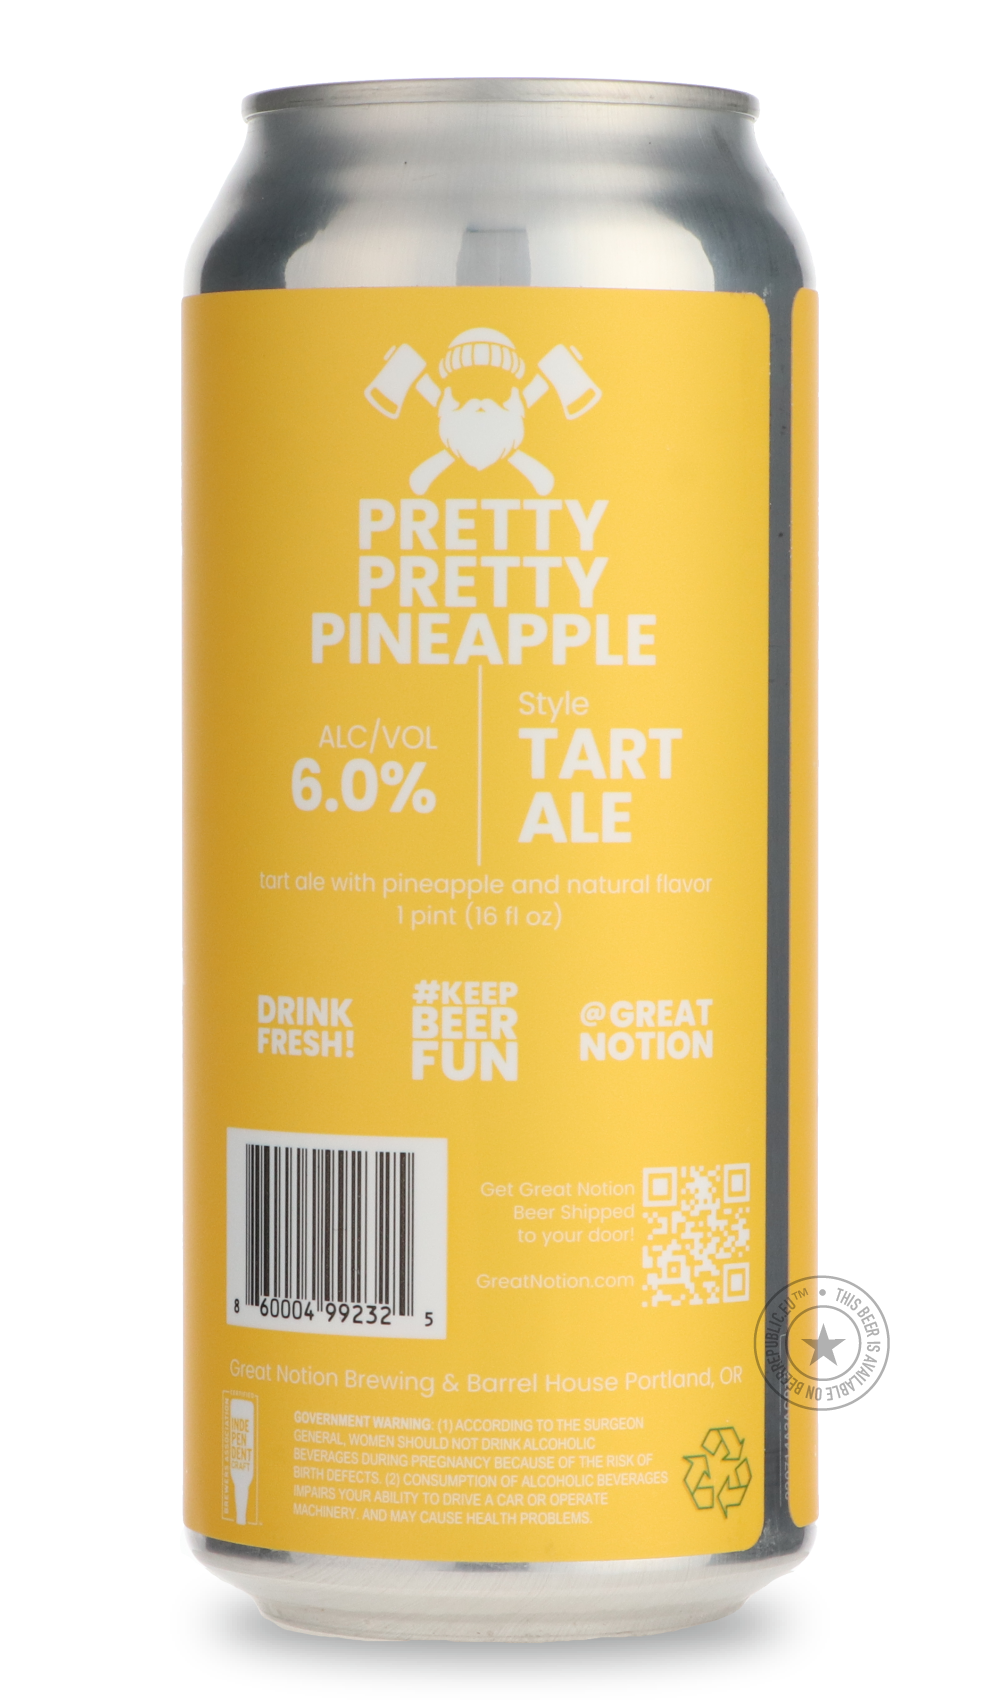 -Great Notion- Pretty Pretty Pineapple-Sour / Wild & Fruity- Only @ Beer Republic - The best online beer store for American & Canadian craft beer - Buy beer online from the USA and Canada - Bier online kopen - Amerikaans bier kopen - Craft beer store - Craft beer kopen - Amerikanisch bier kaufen - Bier online kaufen - Acheter biere online - IPA - Stout - Porter - New England IPA - Hazy IPA - Imperial Stout - Barrel Aged - Barrel Aged Imperial Stout - Brown - Dark beer - Blond - Blonde - Pilsner - Lager - Wh